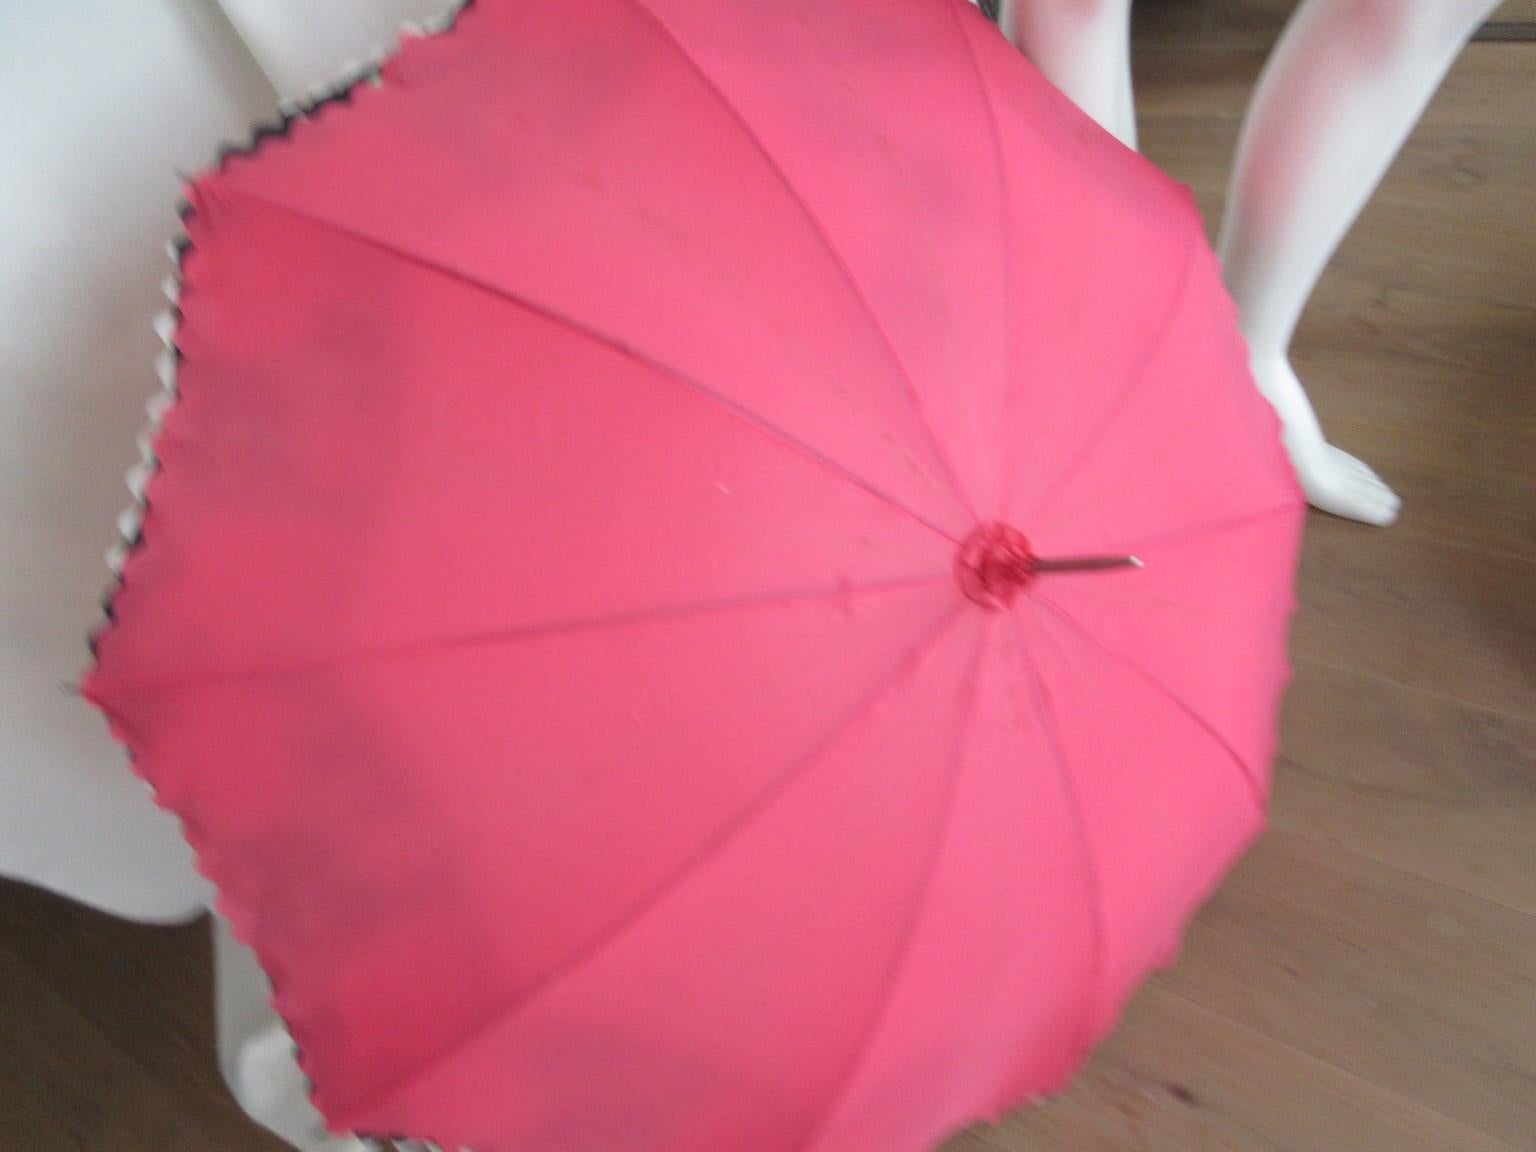 This vintage pink umbrella with horse on horseshoe on handle, from around the 1960s

We offer more exclusive vintage items, view our frontstore

Details:
Unique piece
Collectors item
It is made of pink color nylon fabric, with a flower print design